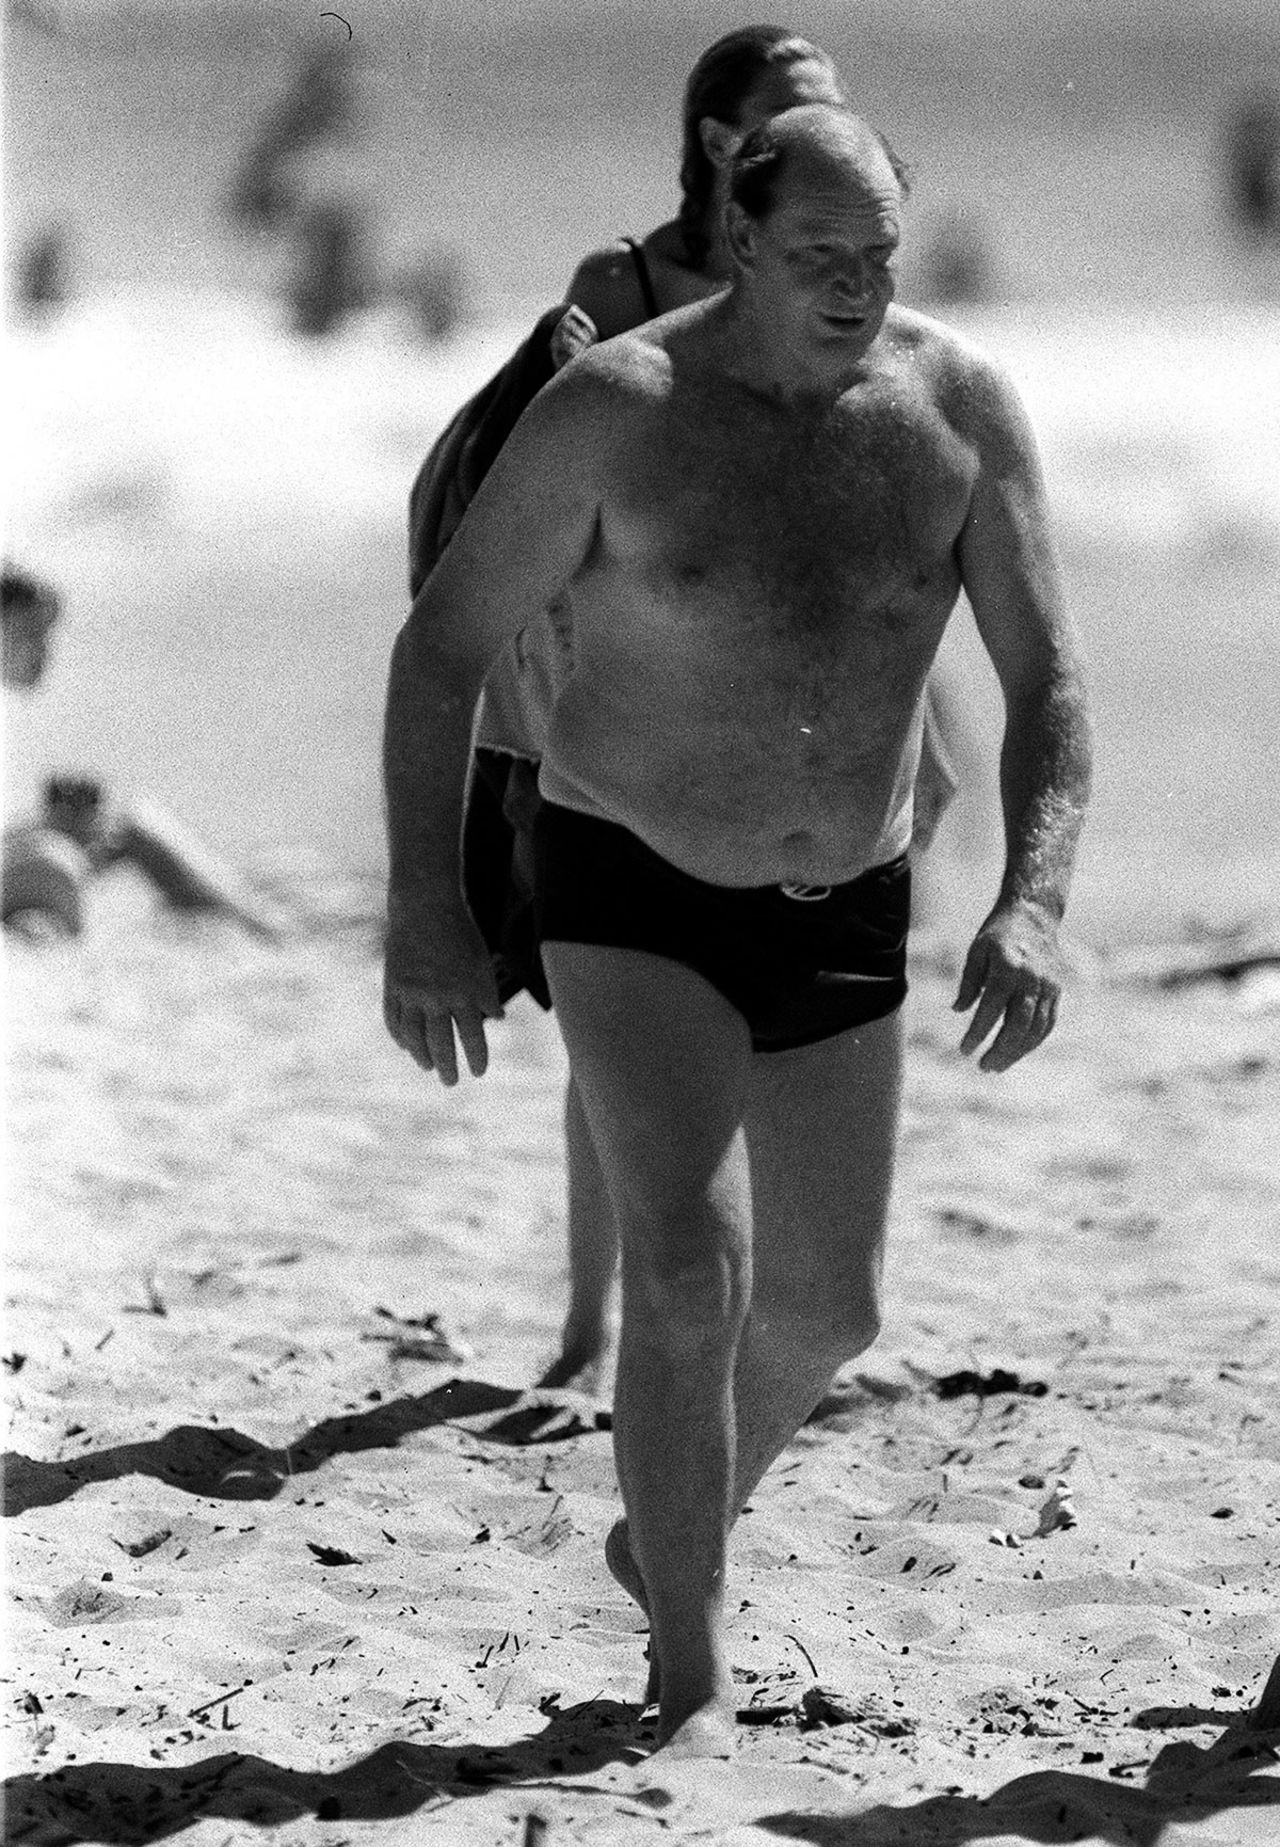 Kerry Packer emerges from a dip in the ocean at Palm Beach, January 5, 1990